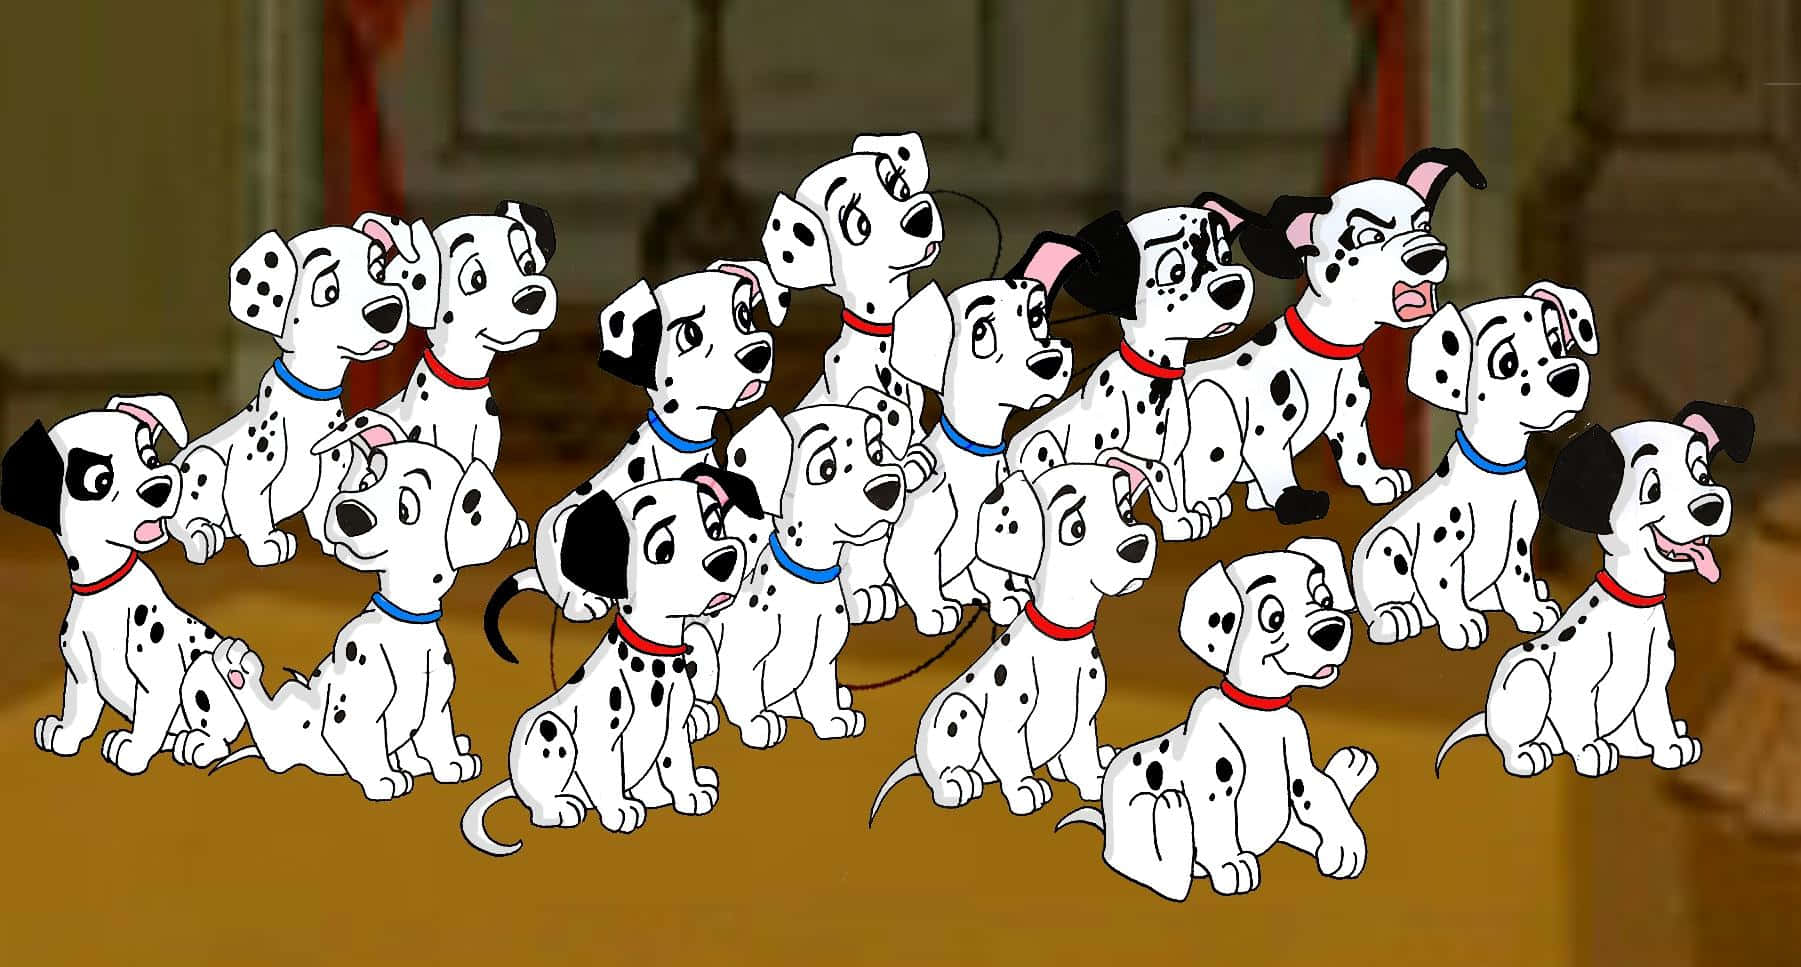 Meet 101 Dalmatians, a pack of adorable puppies ready to embark on an adventure to save their family.